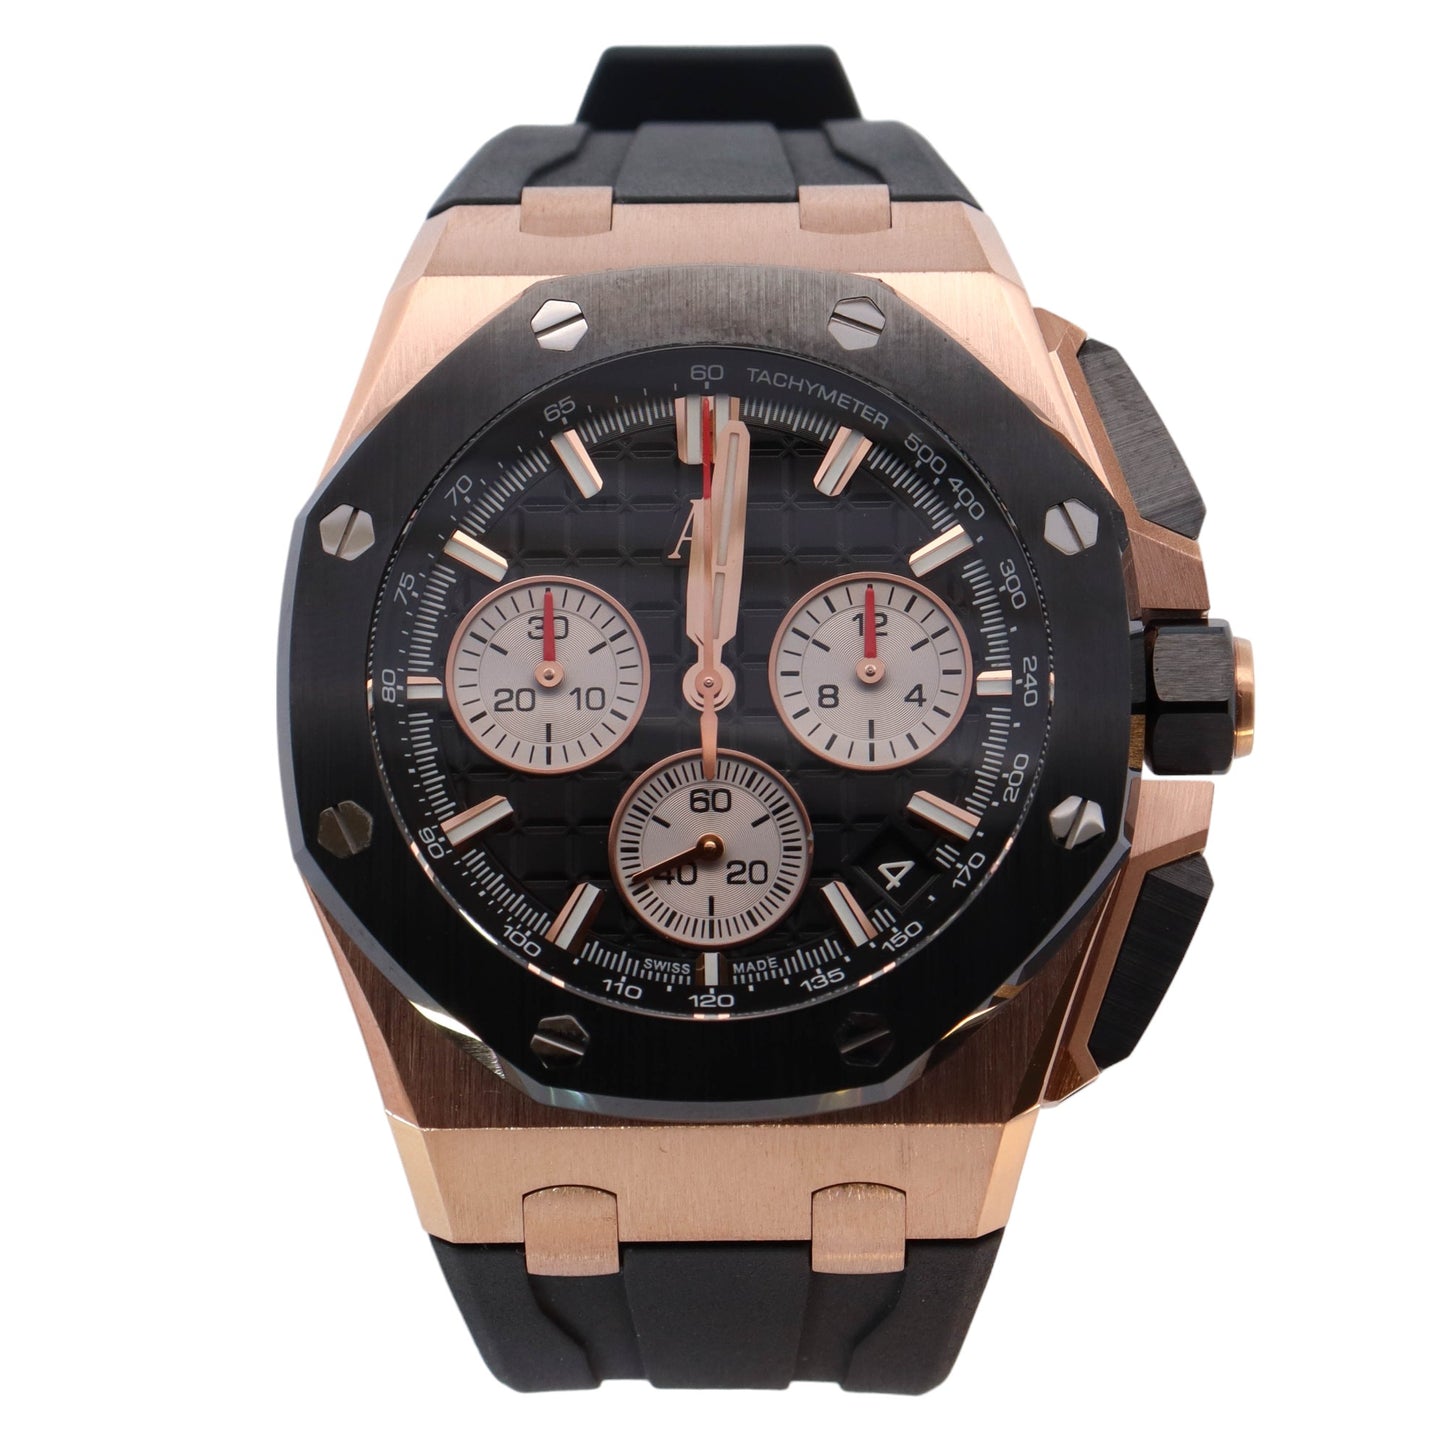 Audemars Piguet Royal Oak Offshore Rose Gold 43mm Black Chronograph Dial Watch Reference# 26420RO.OO.A002CA.01